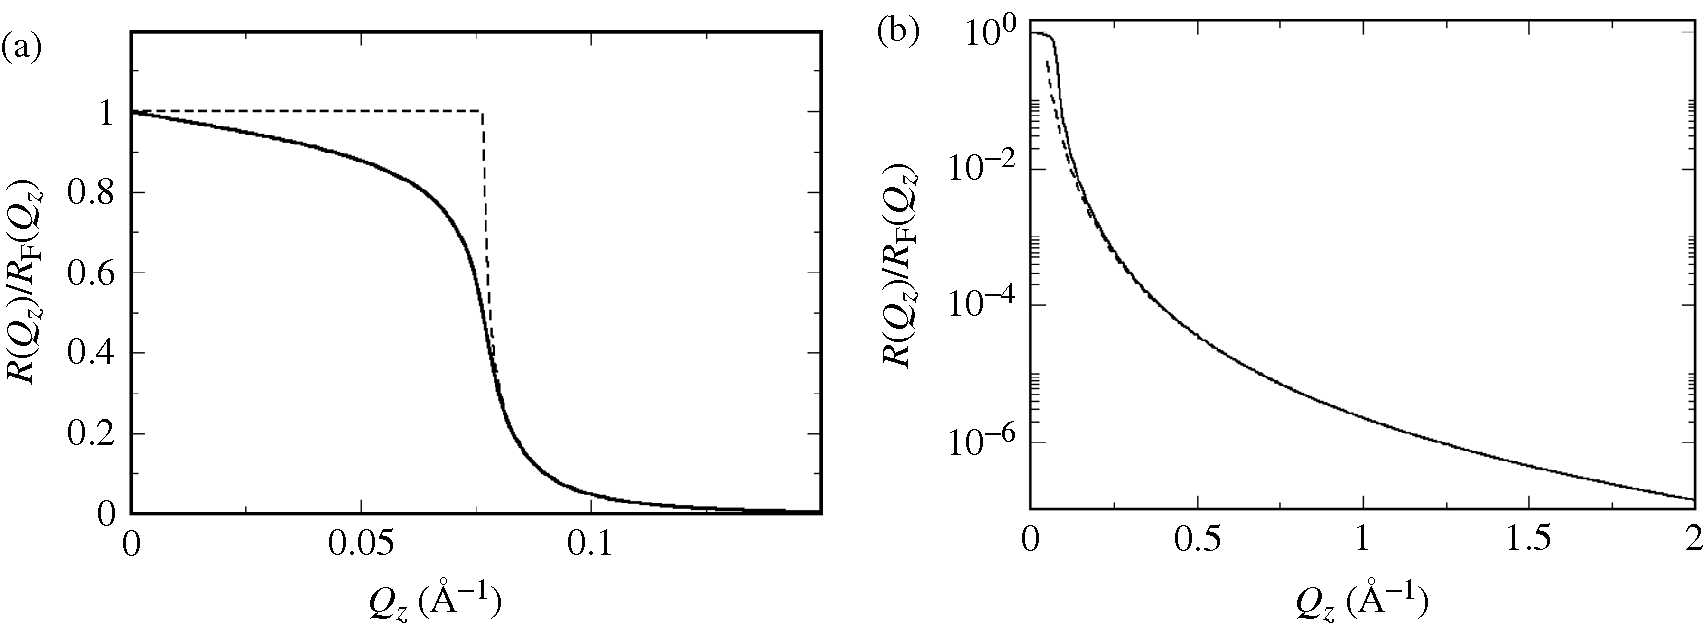 Theoryof X Ray Scattering From Liquid Surfaces Chapter 3 Liquid Surfaces And Interfaces